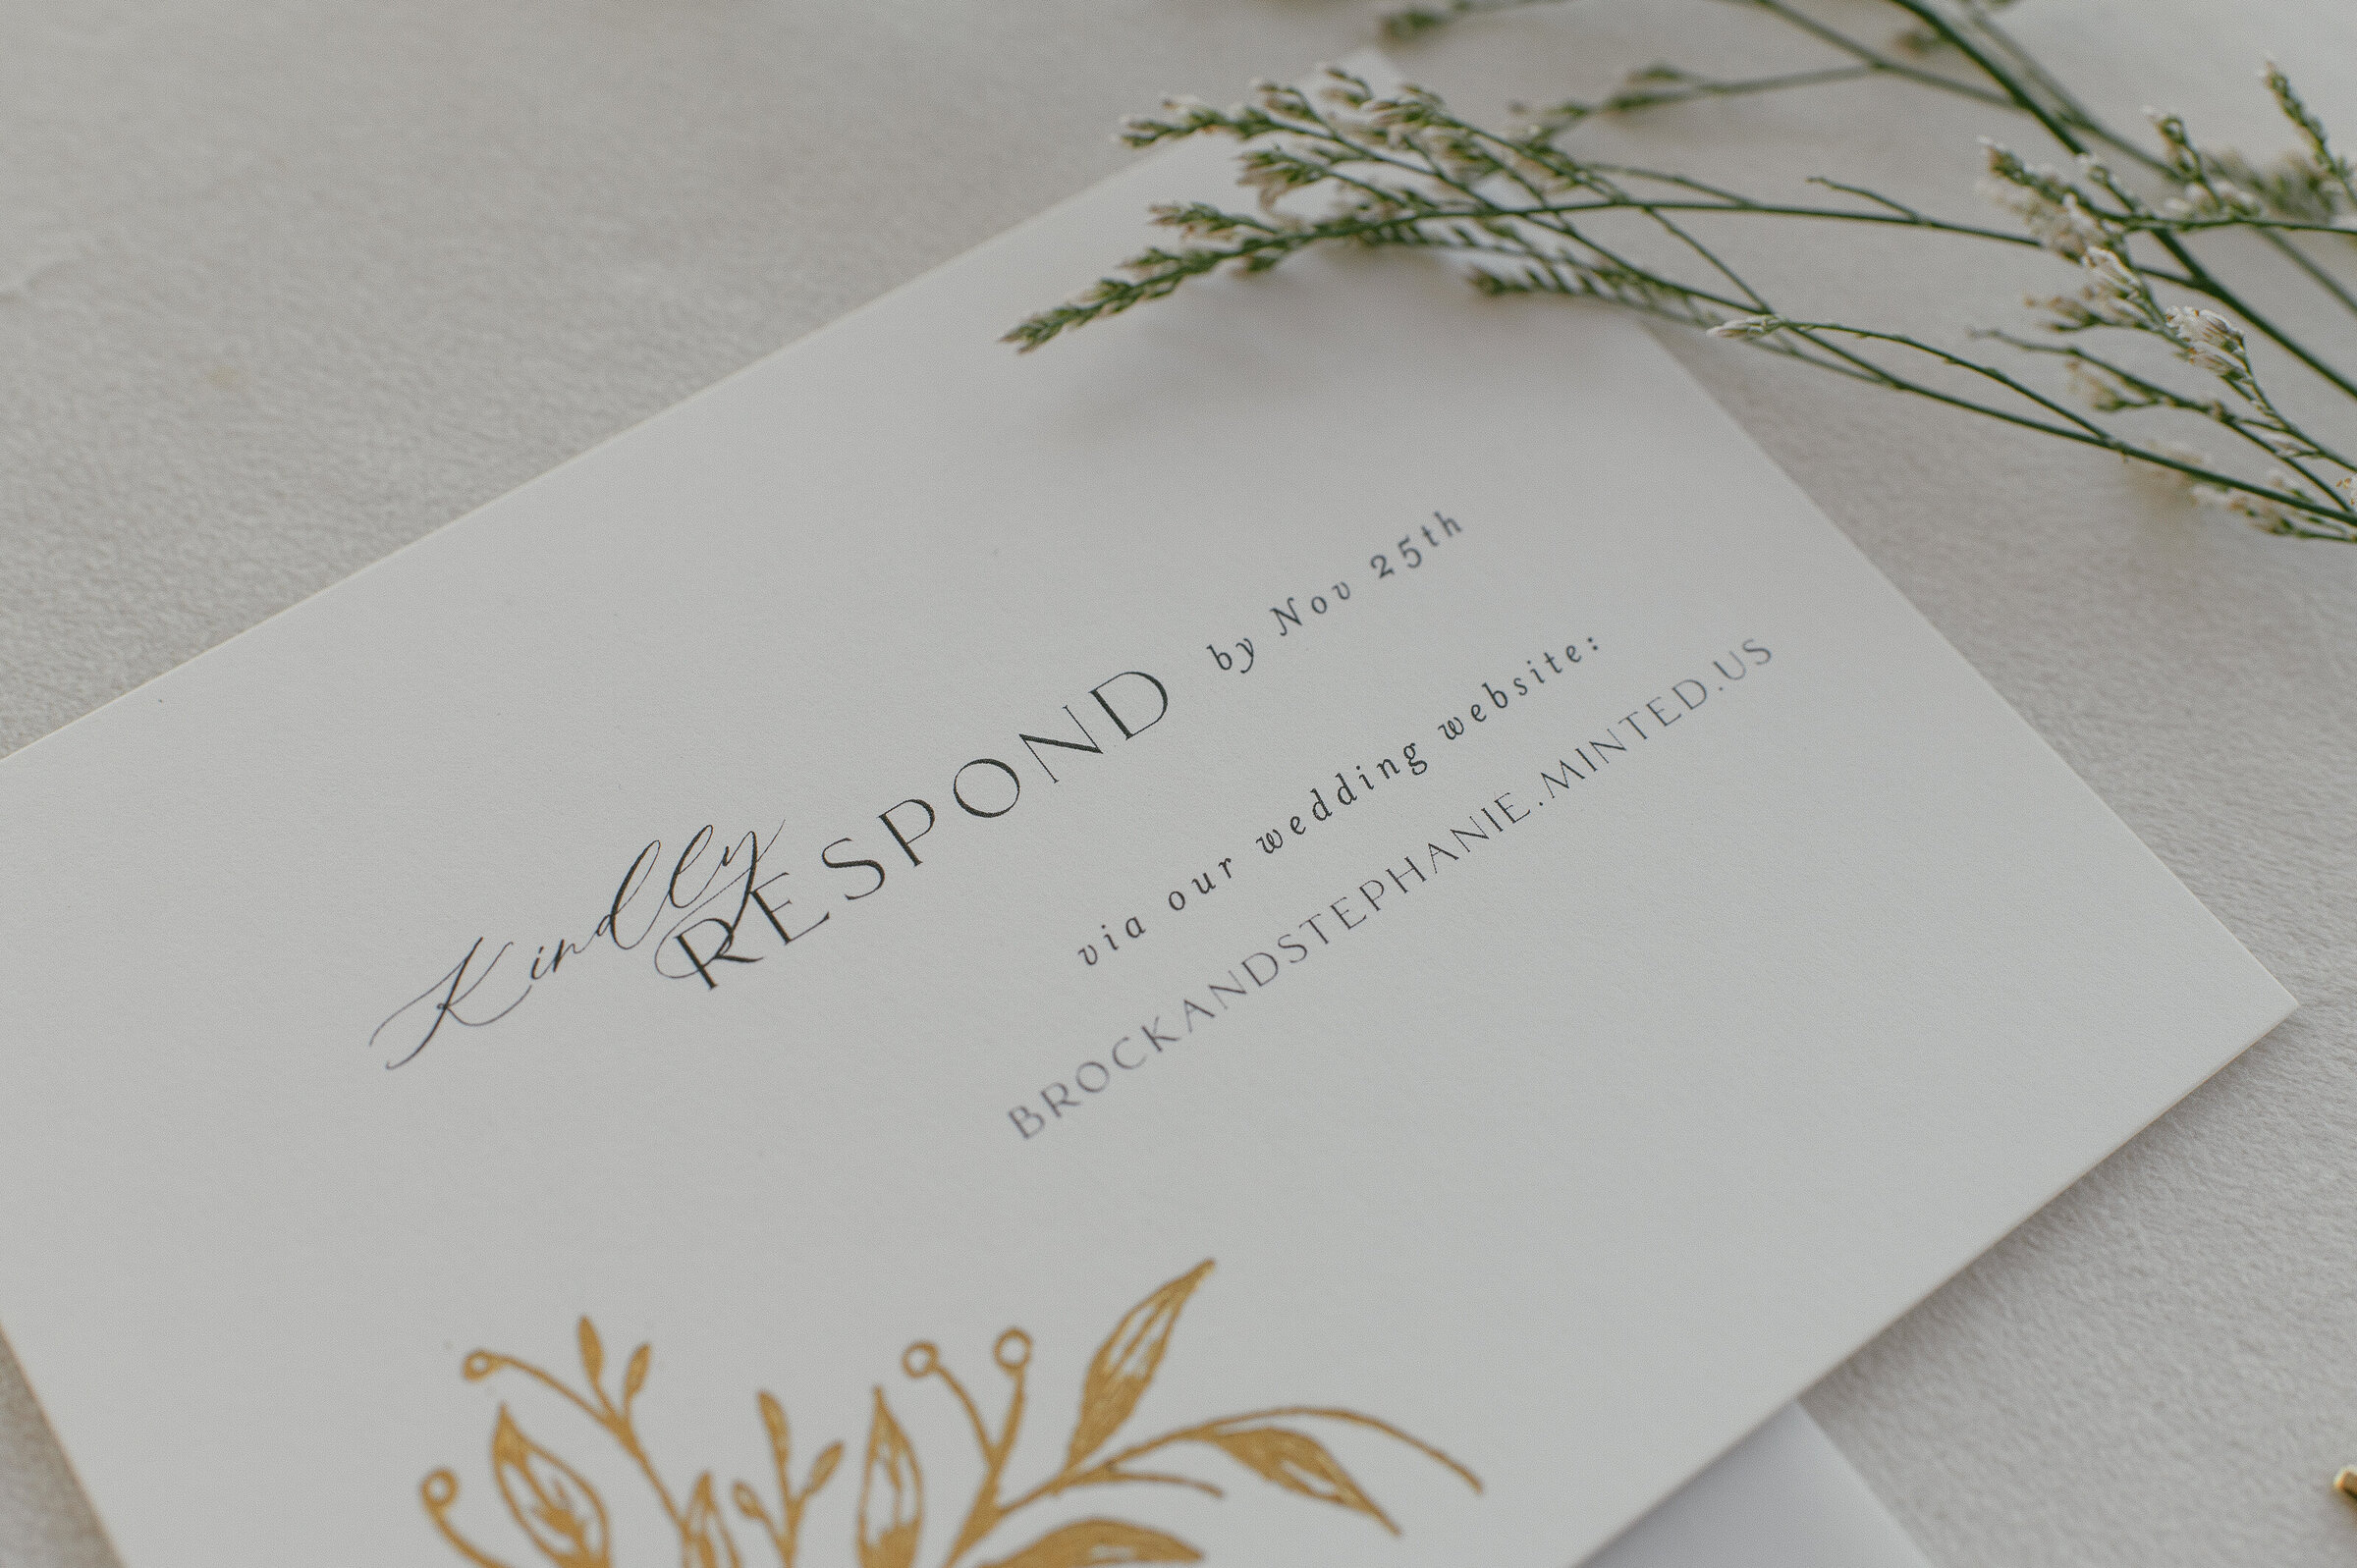 RSVP card for a wedding with a request to visit the wedding website.